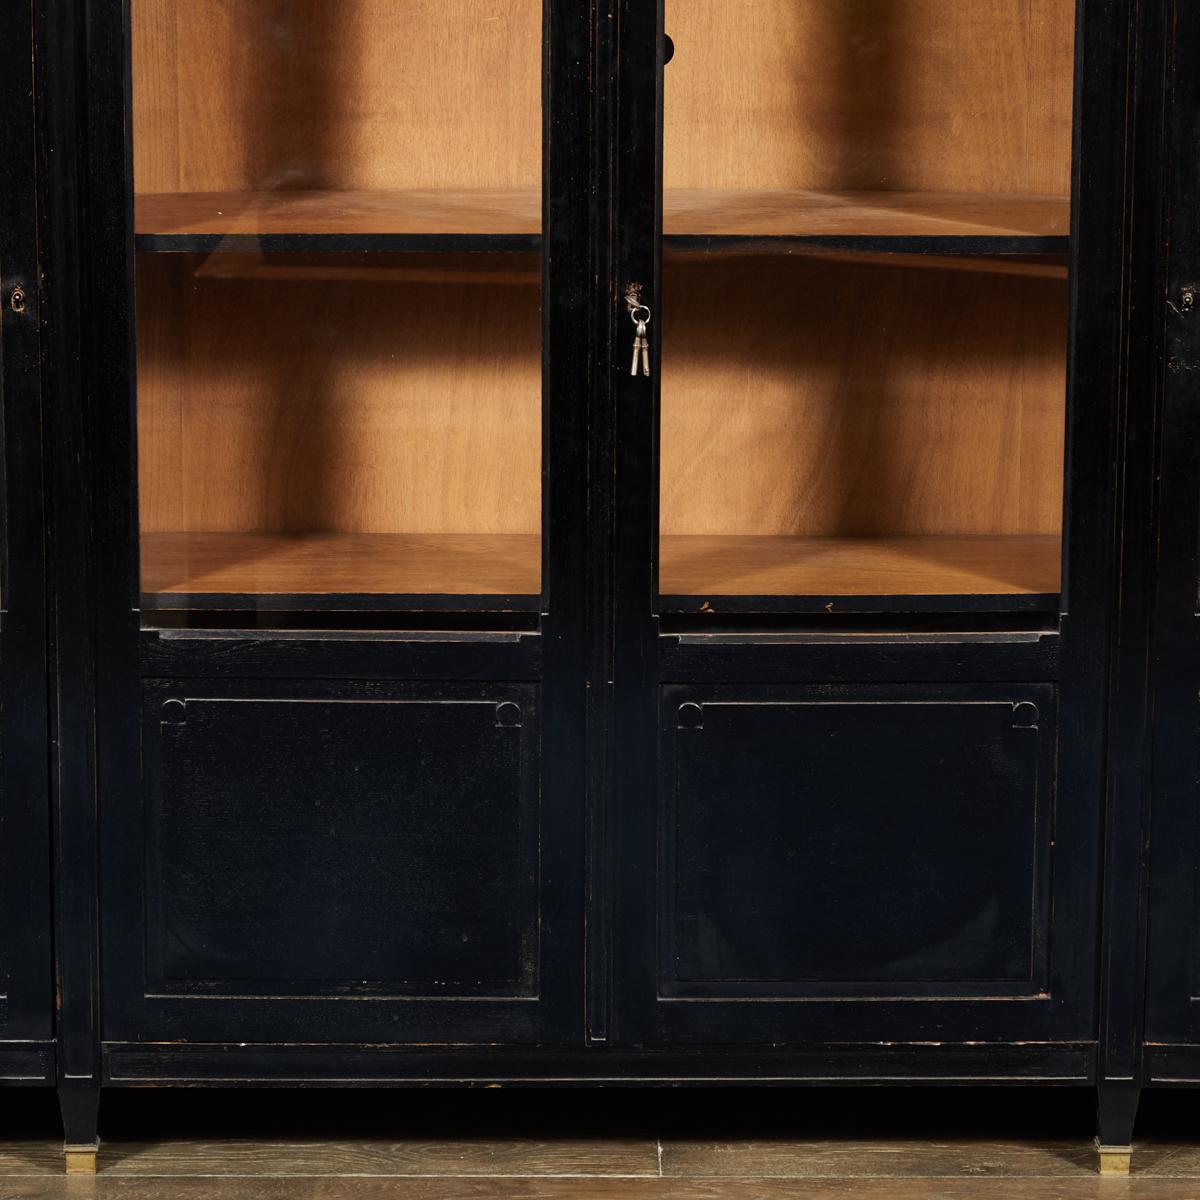 This is an ebonized black oak bookcase with original brass capped hinges dating to the late 19th Century. Key is present. The interior of the bookcase is unpainted and left as the natural oak. This piece would be great as statement storage for a